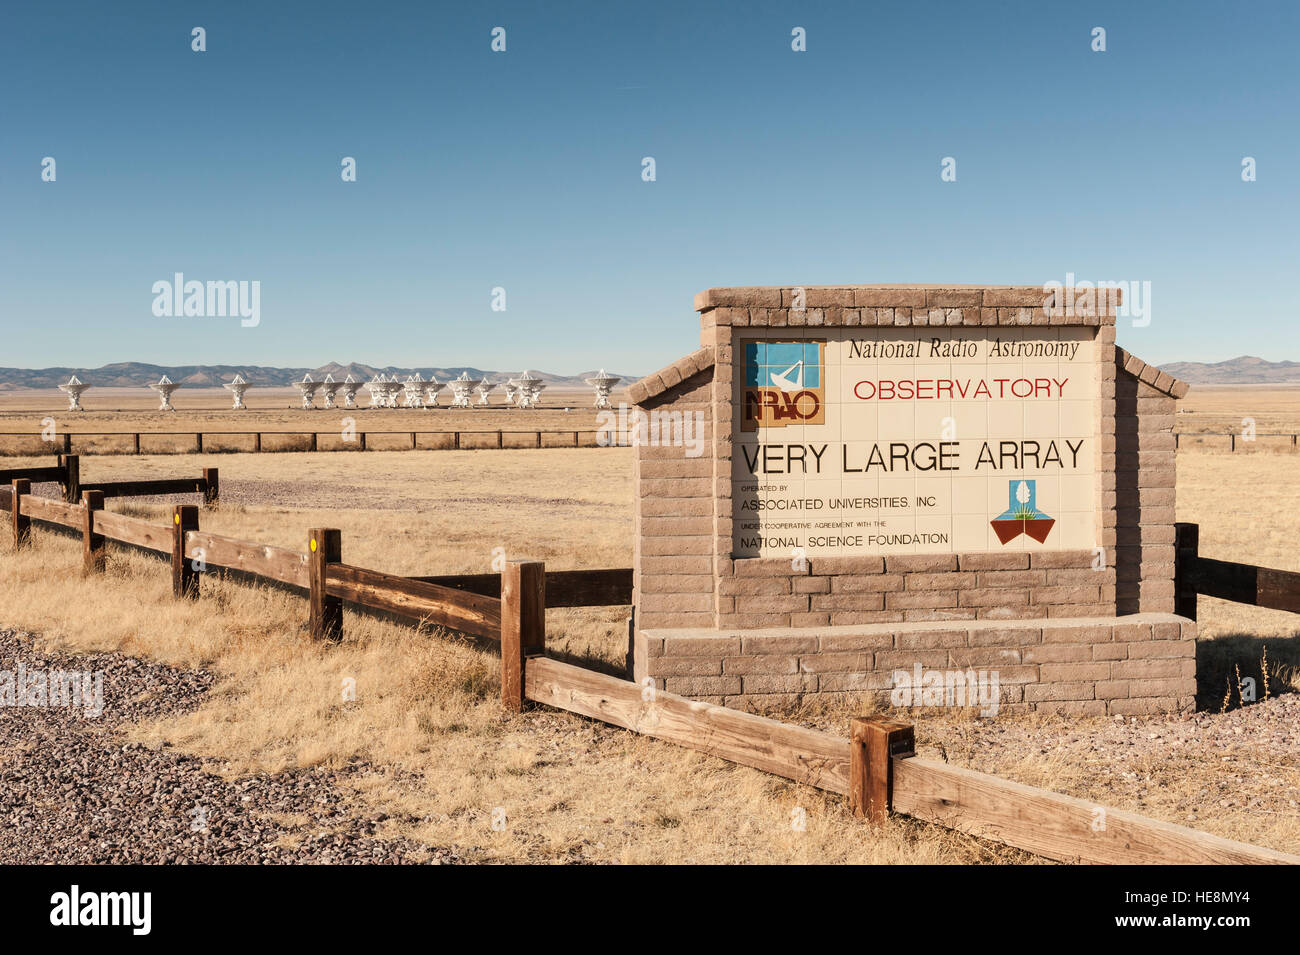 Entrance sign at the Very Large Array (VLA) National Radio Astronomy Observatory in New Mexico, NM, USA. Stock Photo